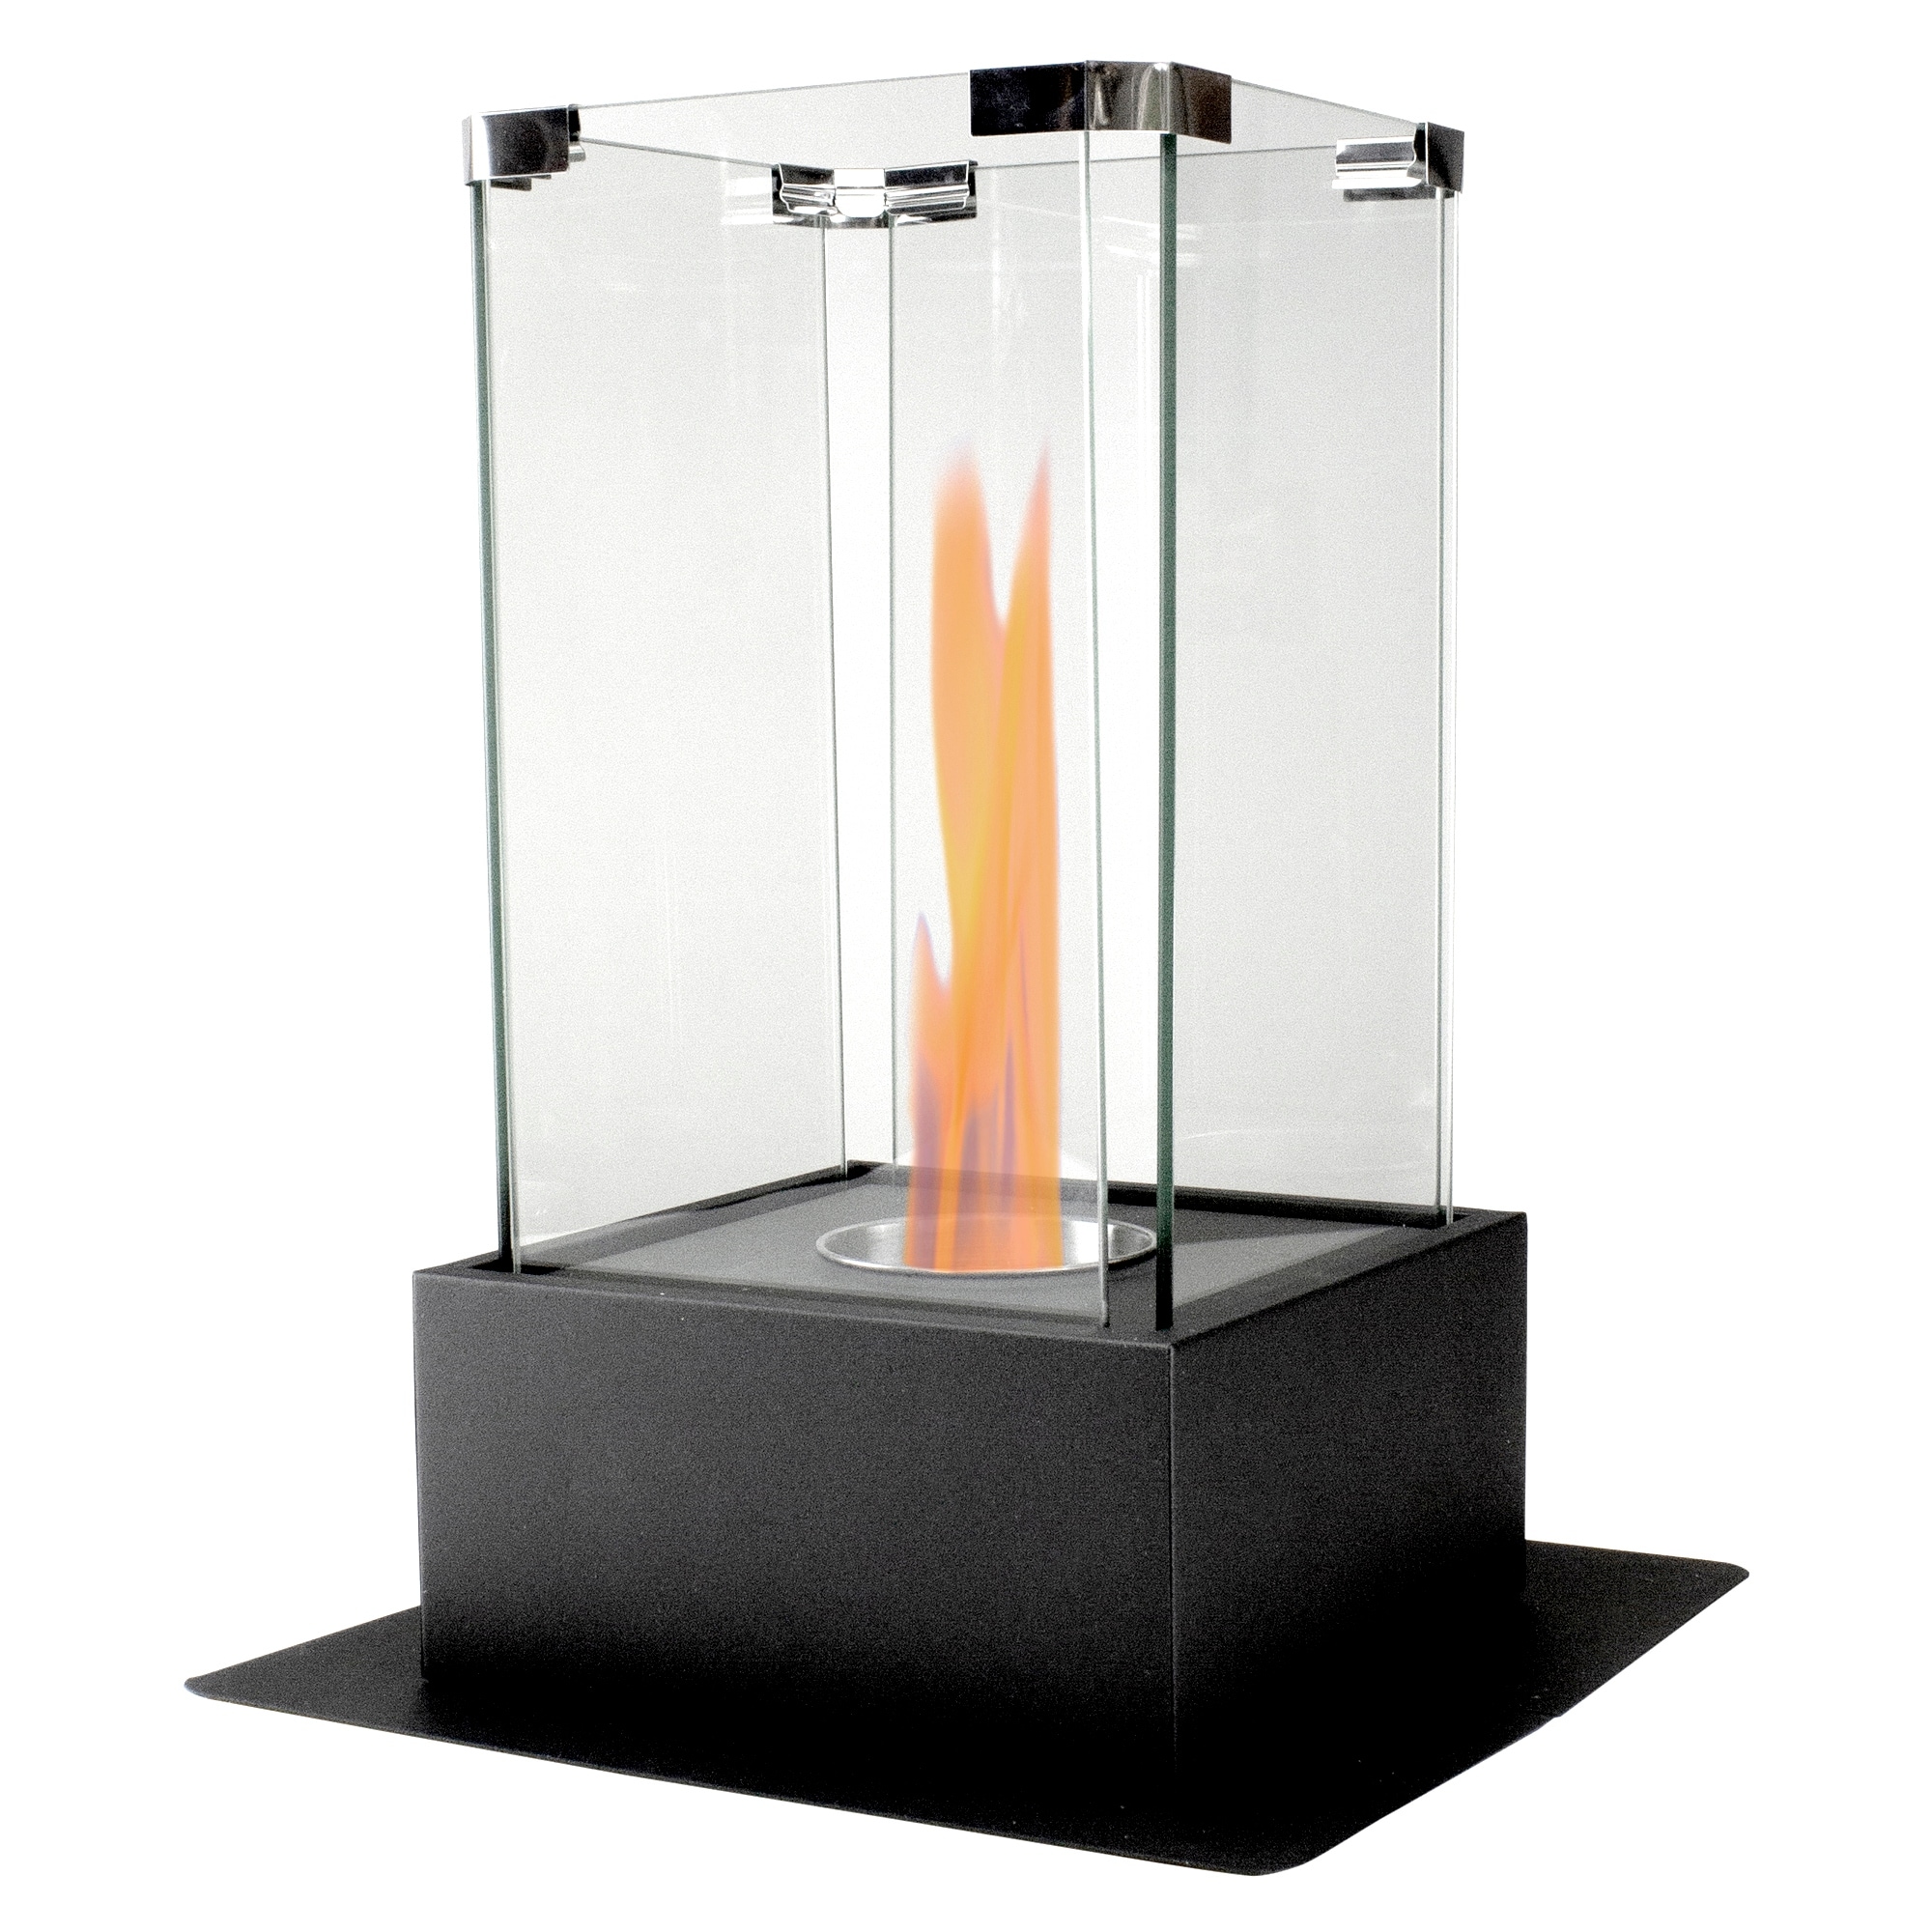 Northlight 15 inch Bio Ethanol Ventless Portable Tabletop Fireplace with Flame Guard